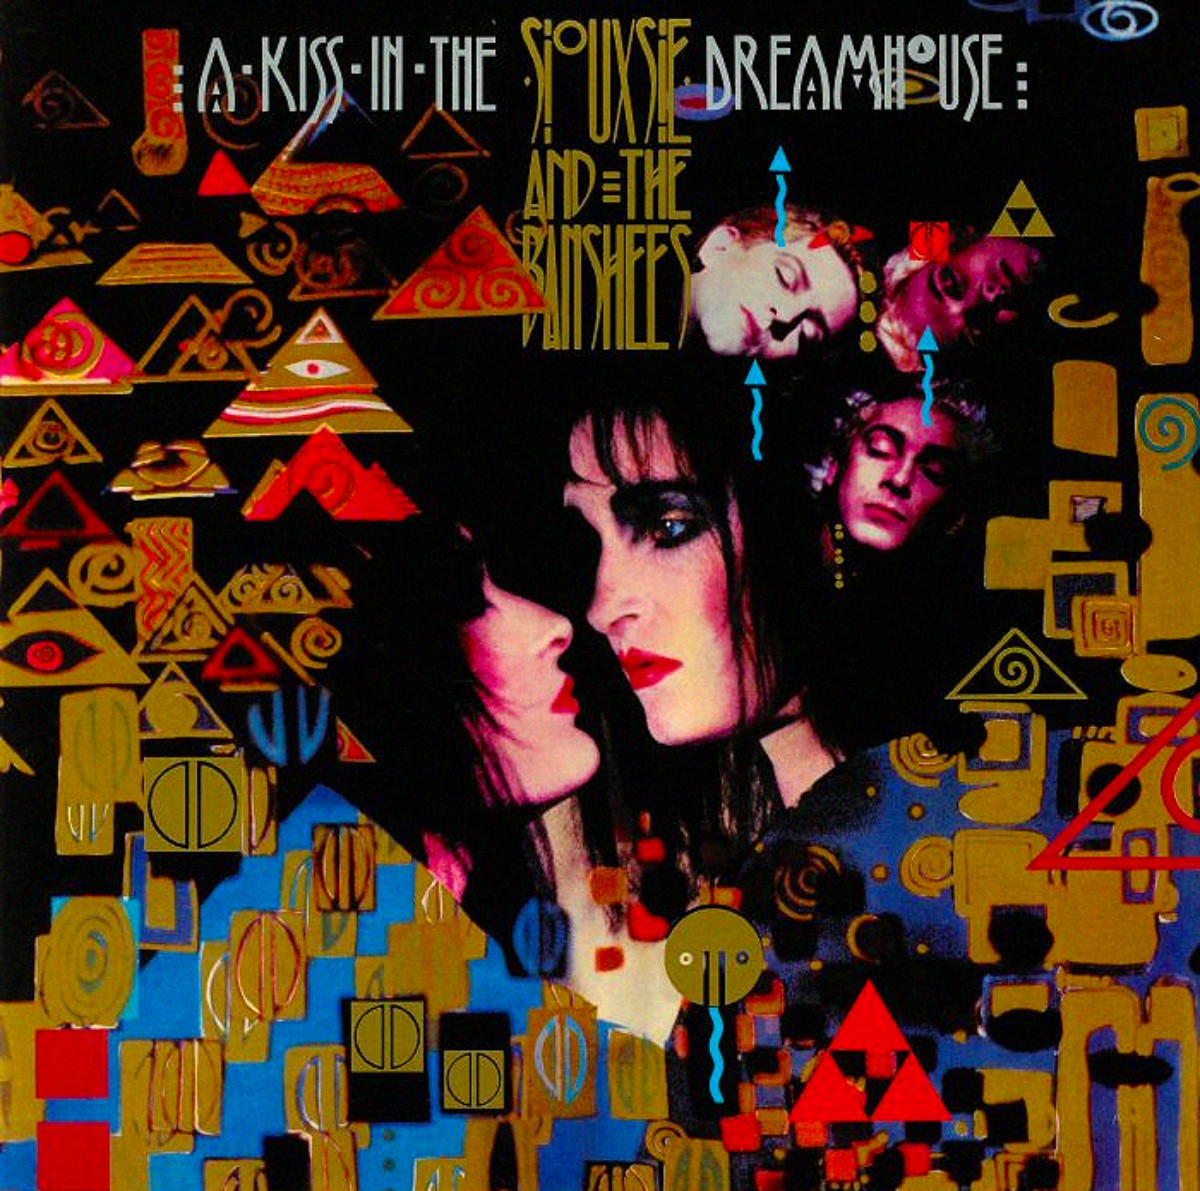 Siouxsie And The Banshees, album "A Kiss in the Dreamhouse" (1982)